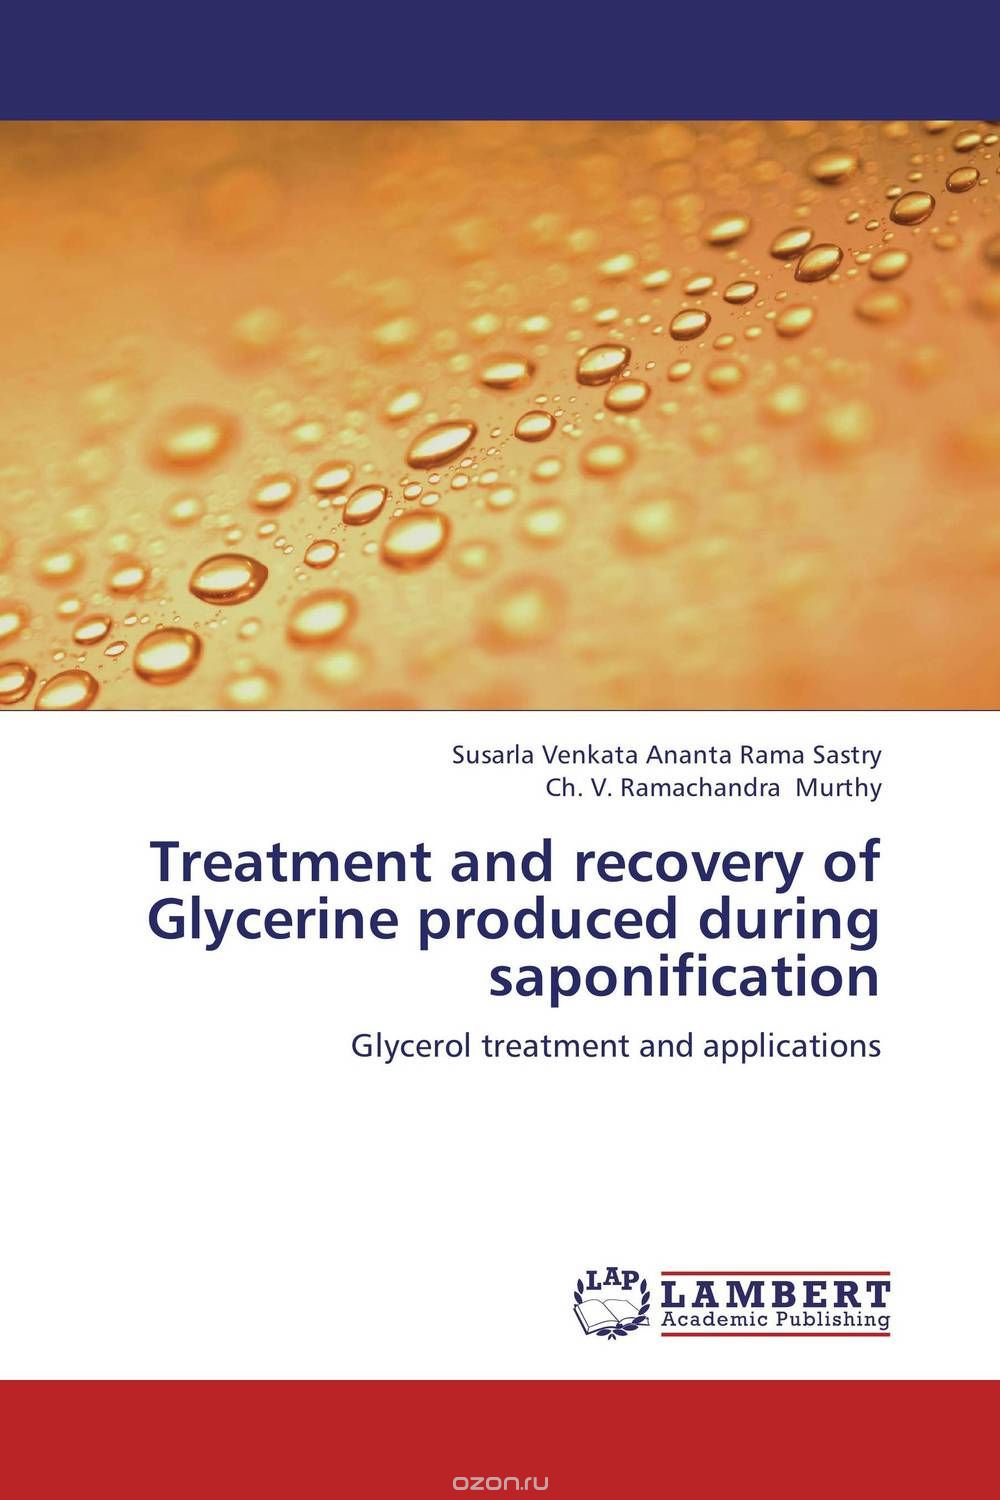 Treatment and recovery of Glycerine produced during saponification